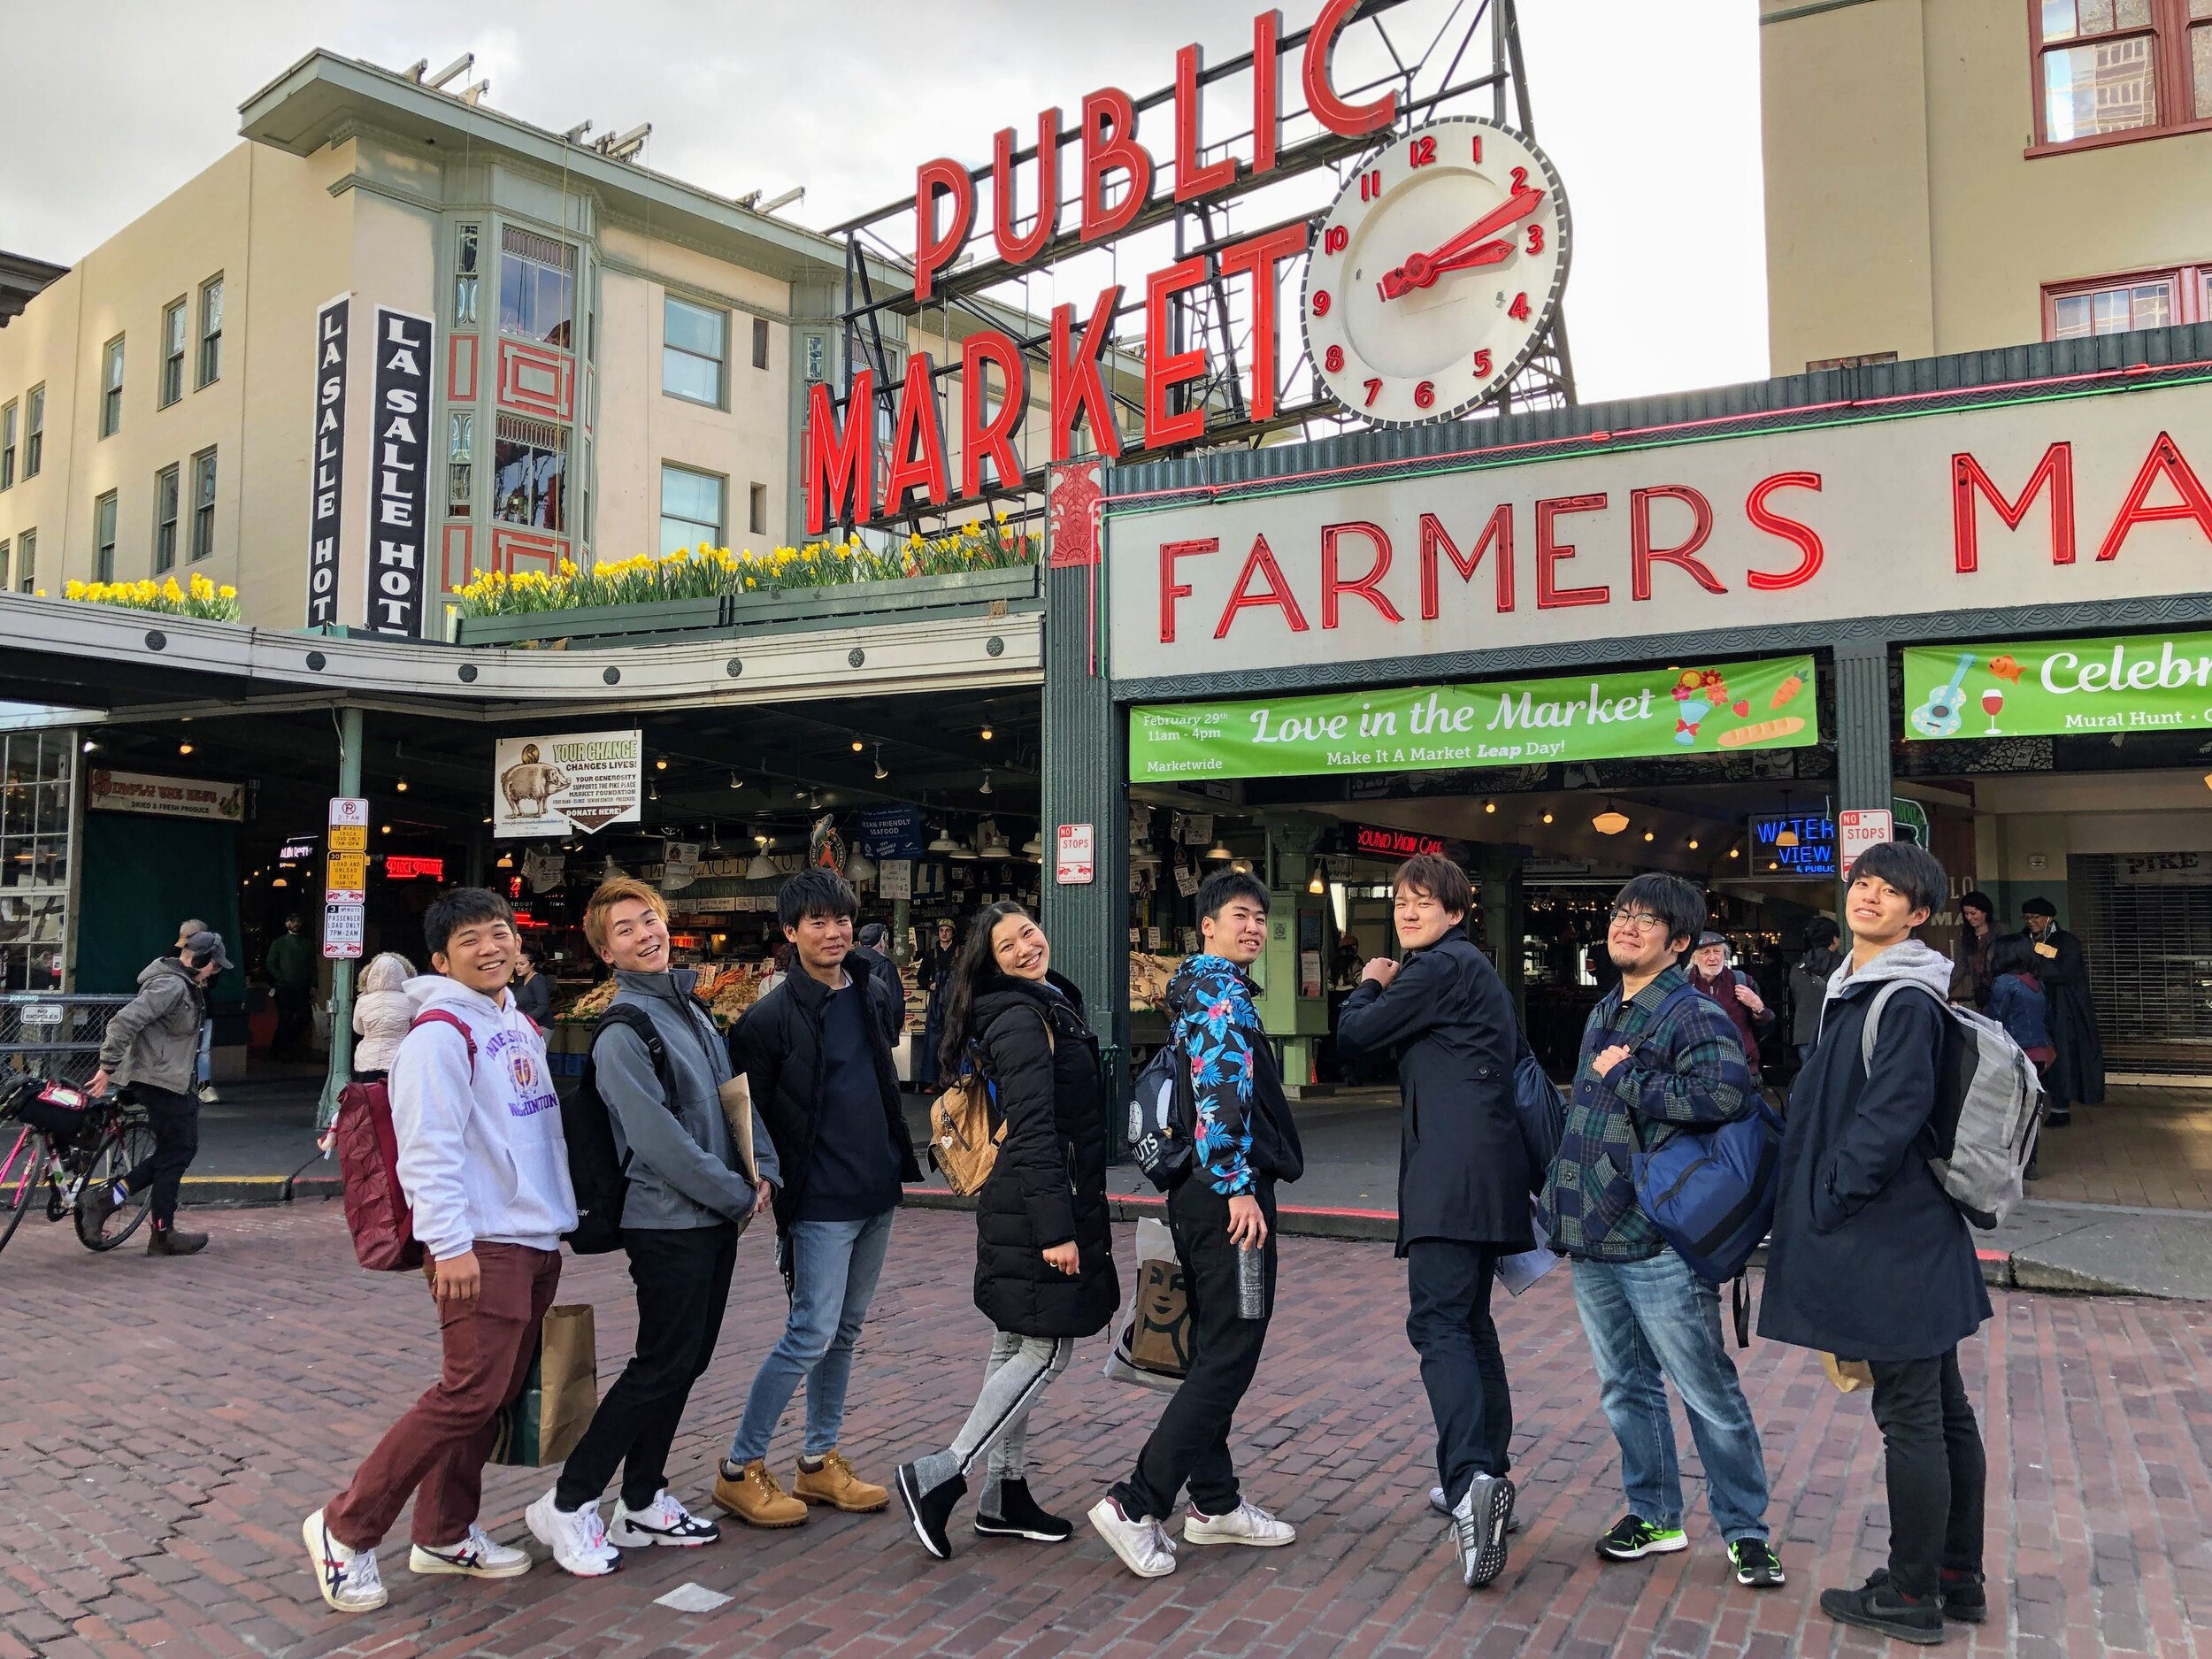 Getting to know Seattle with a scavenger hunt at Pike Place Market